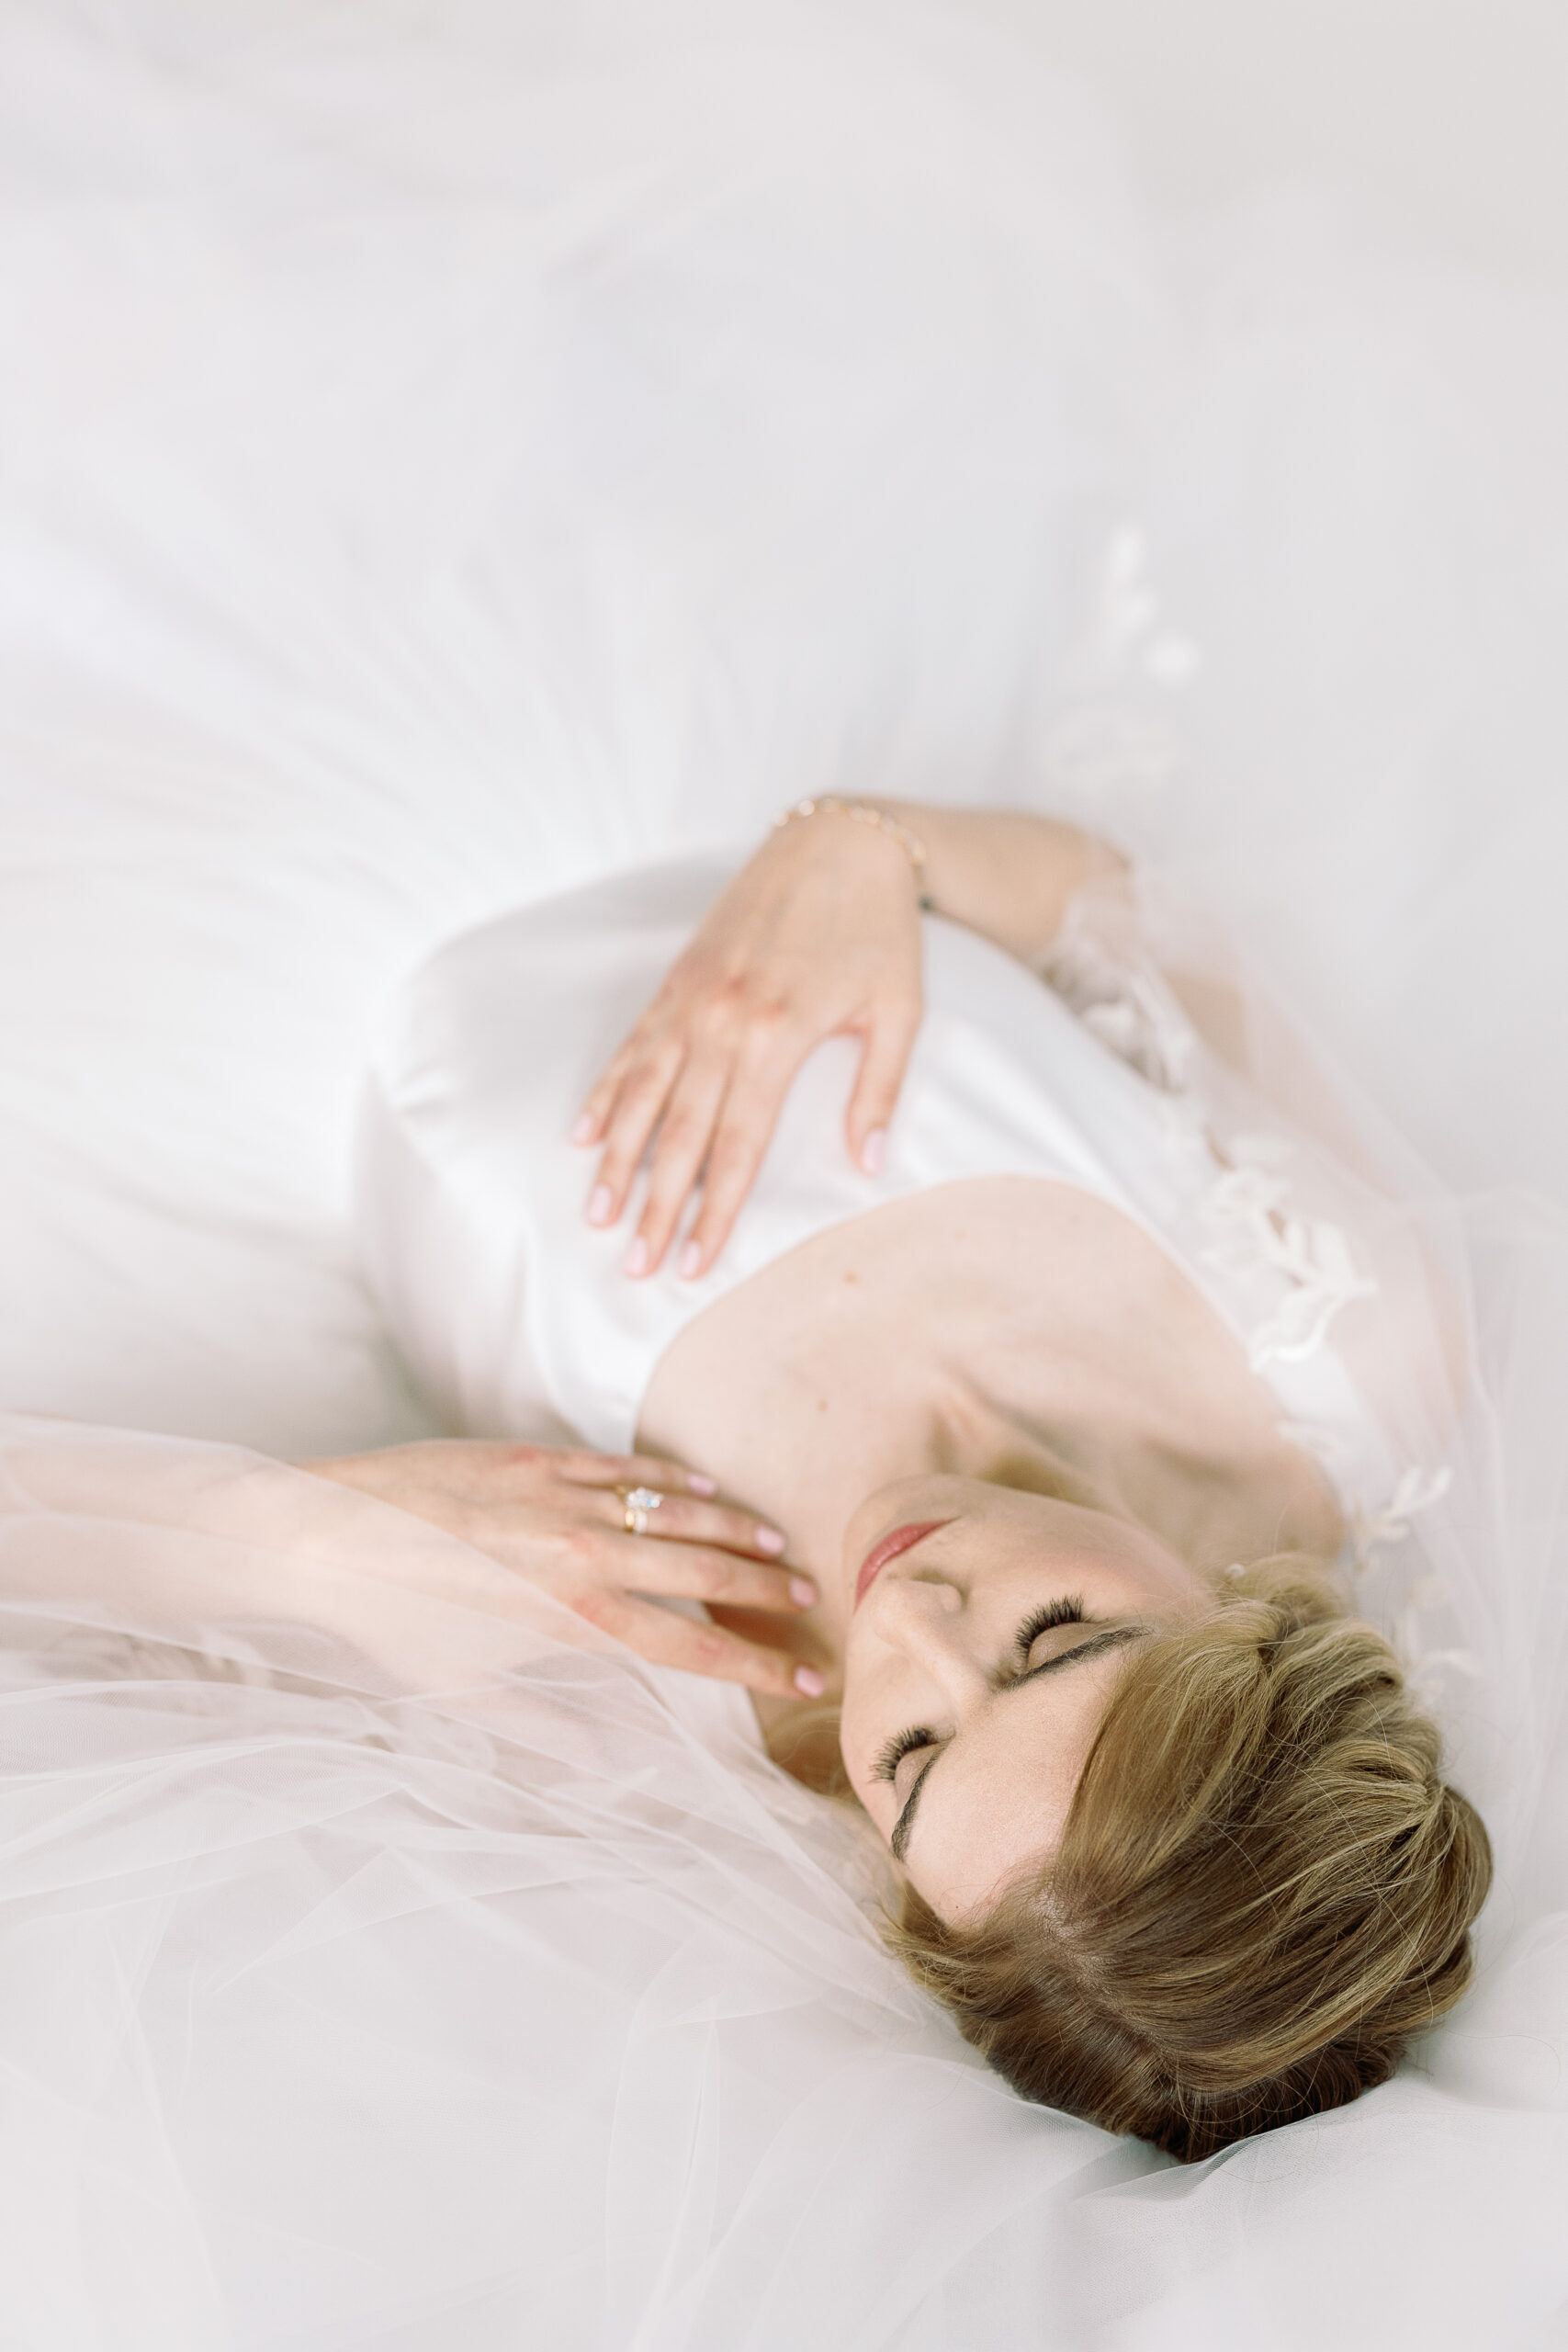 Couture Bride Ashley in Custom Sarah Kolis Gown and veil